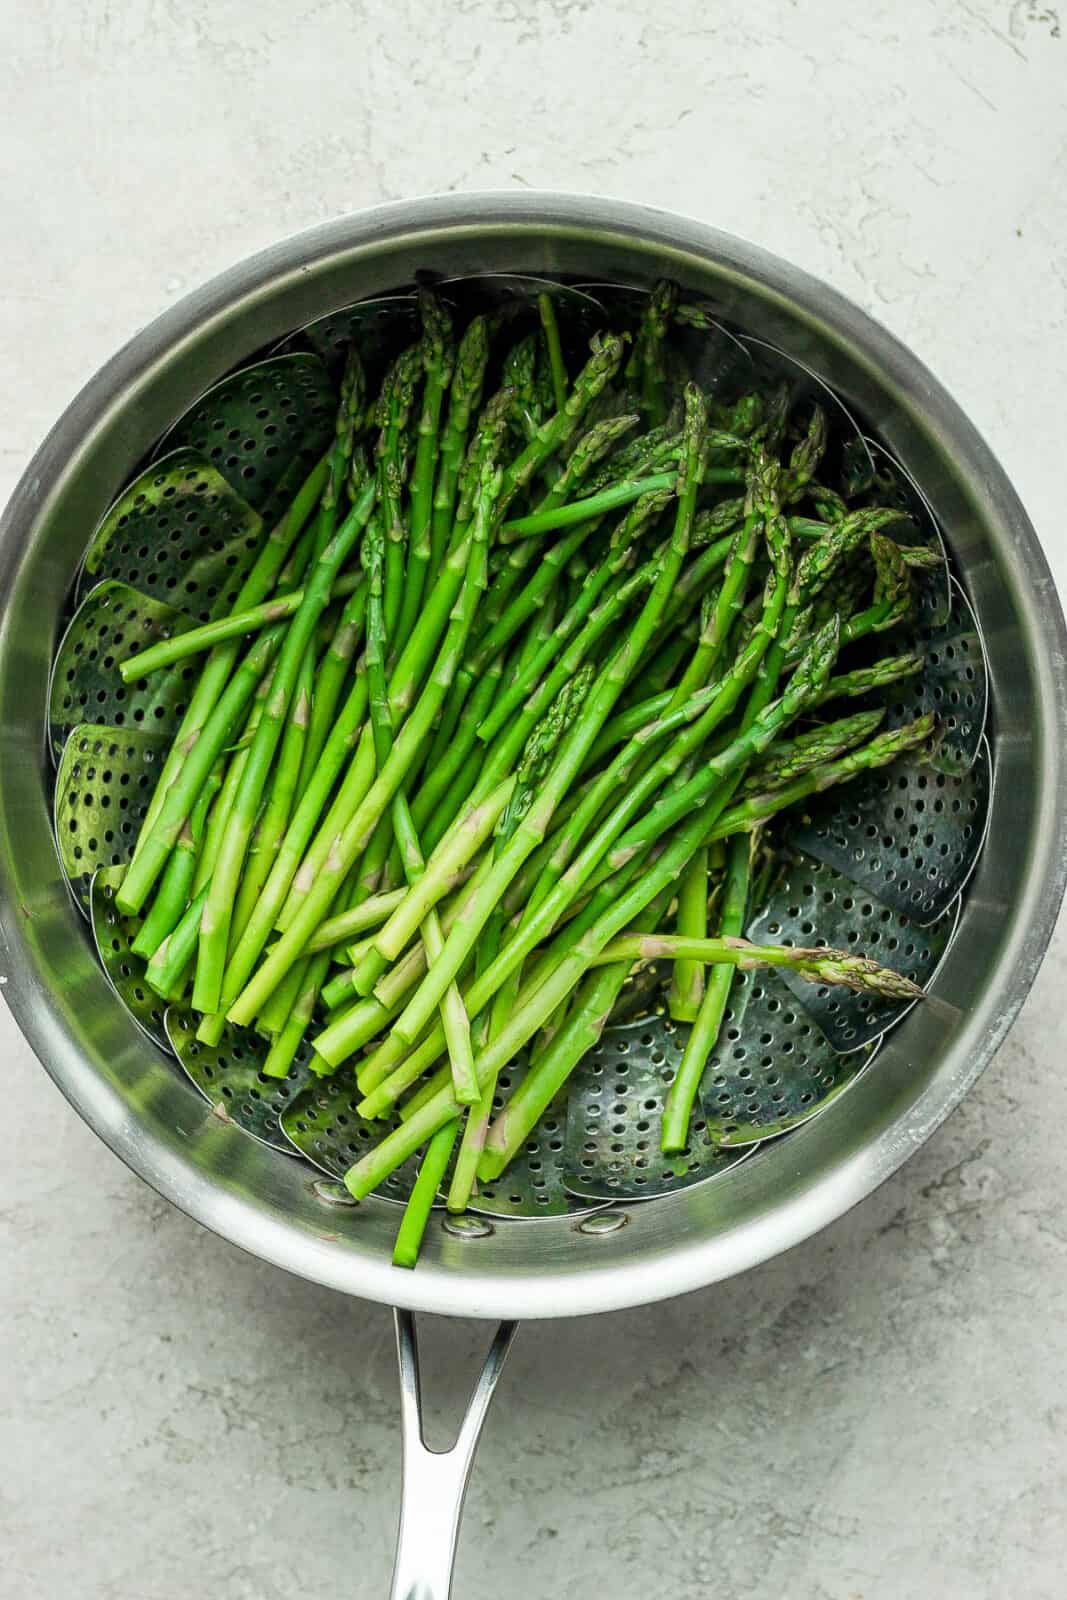 Perfectly steamed asparagus in a steamer basket.